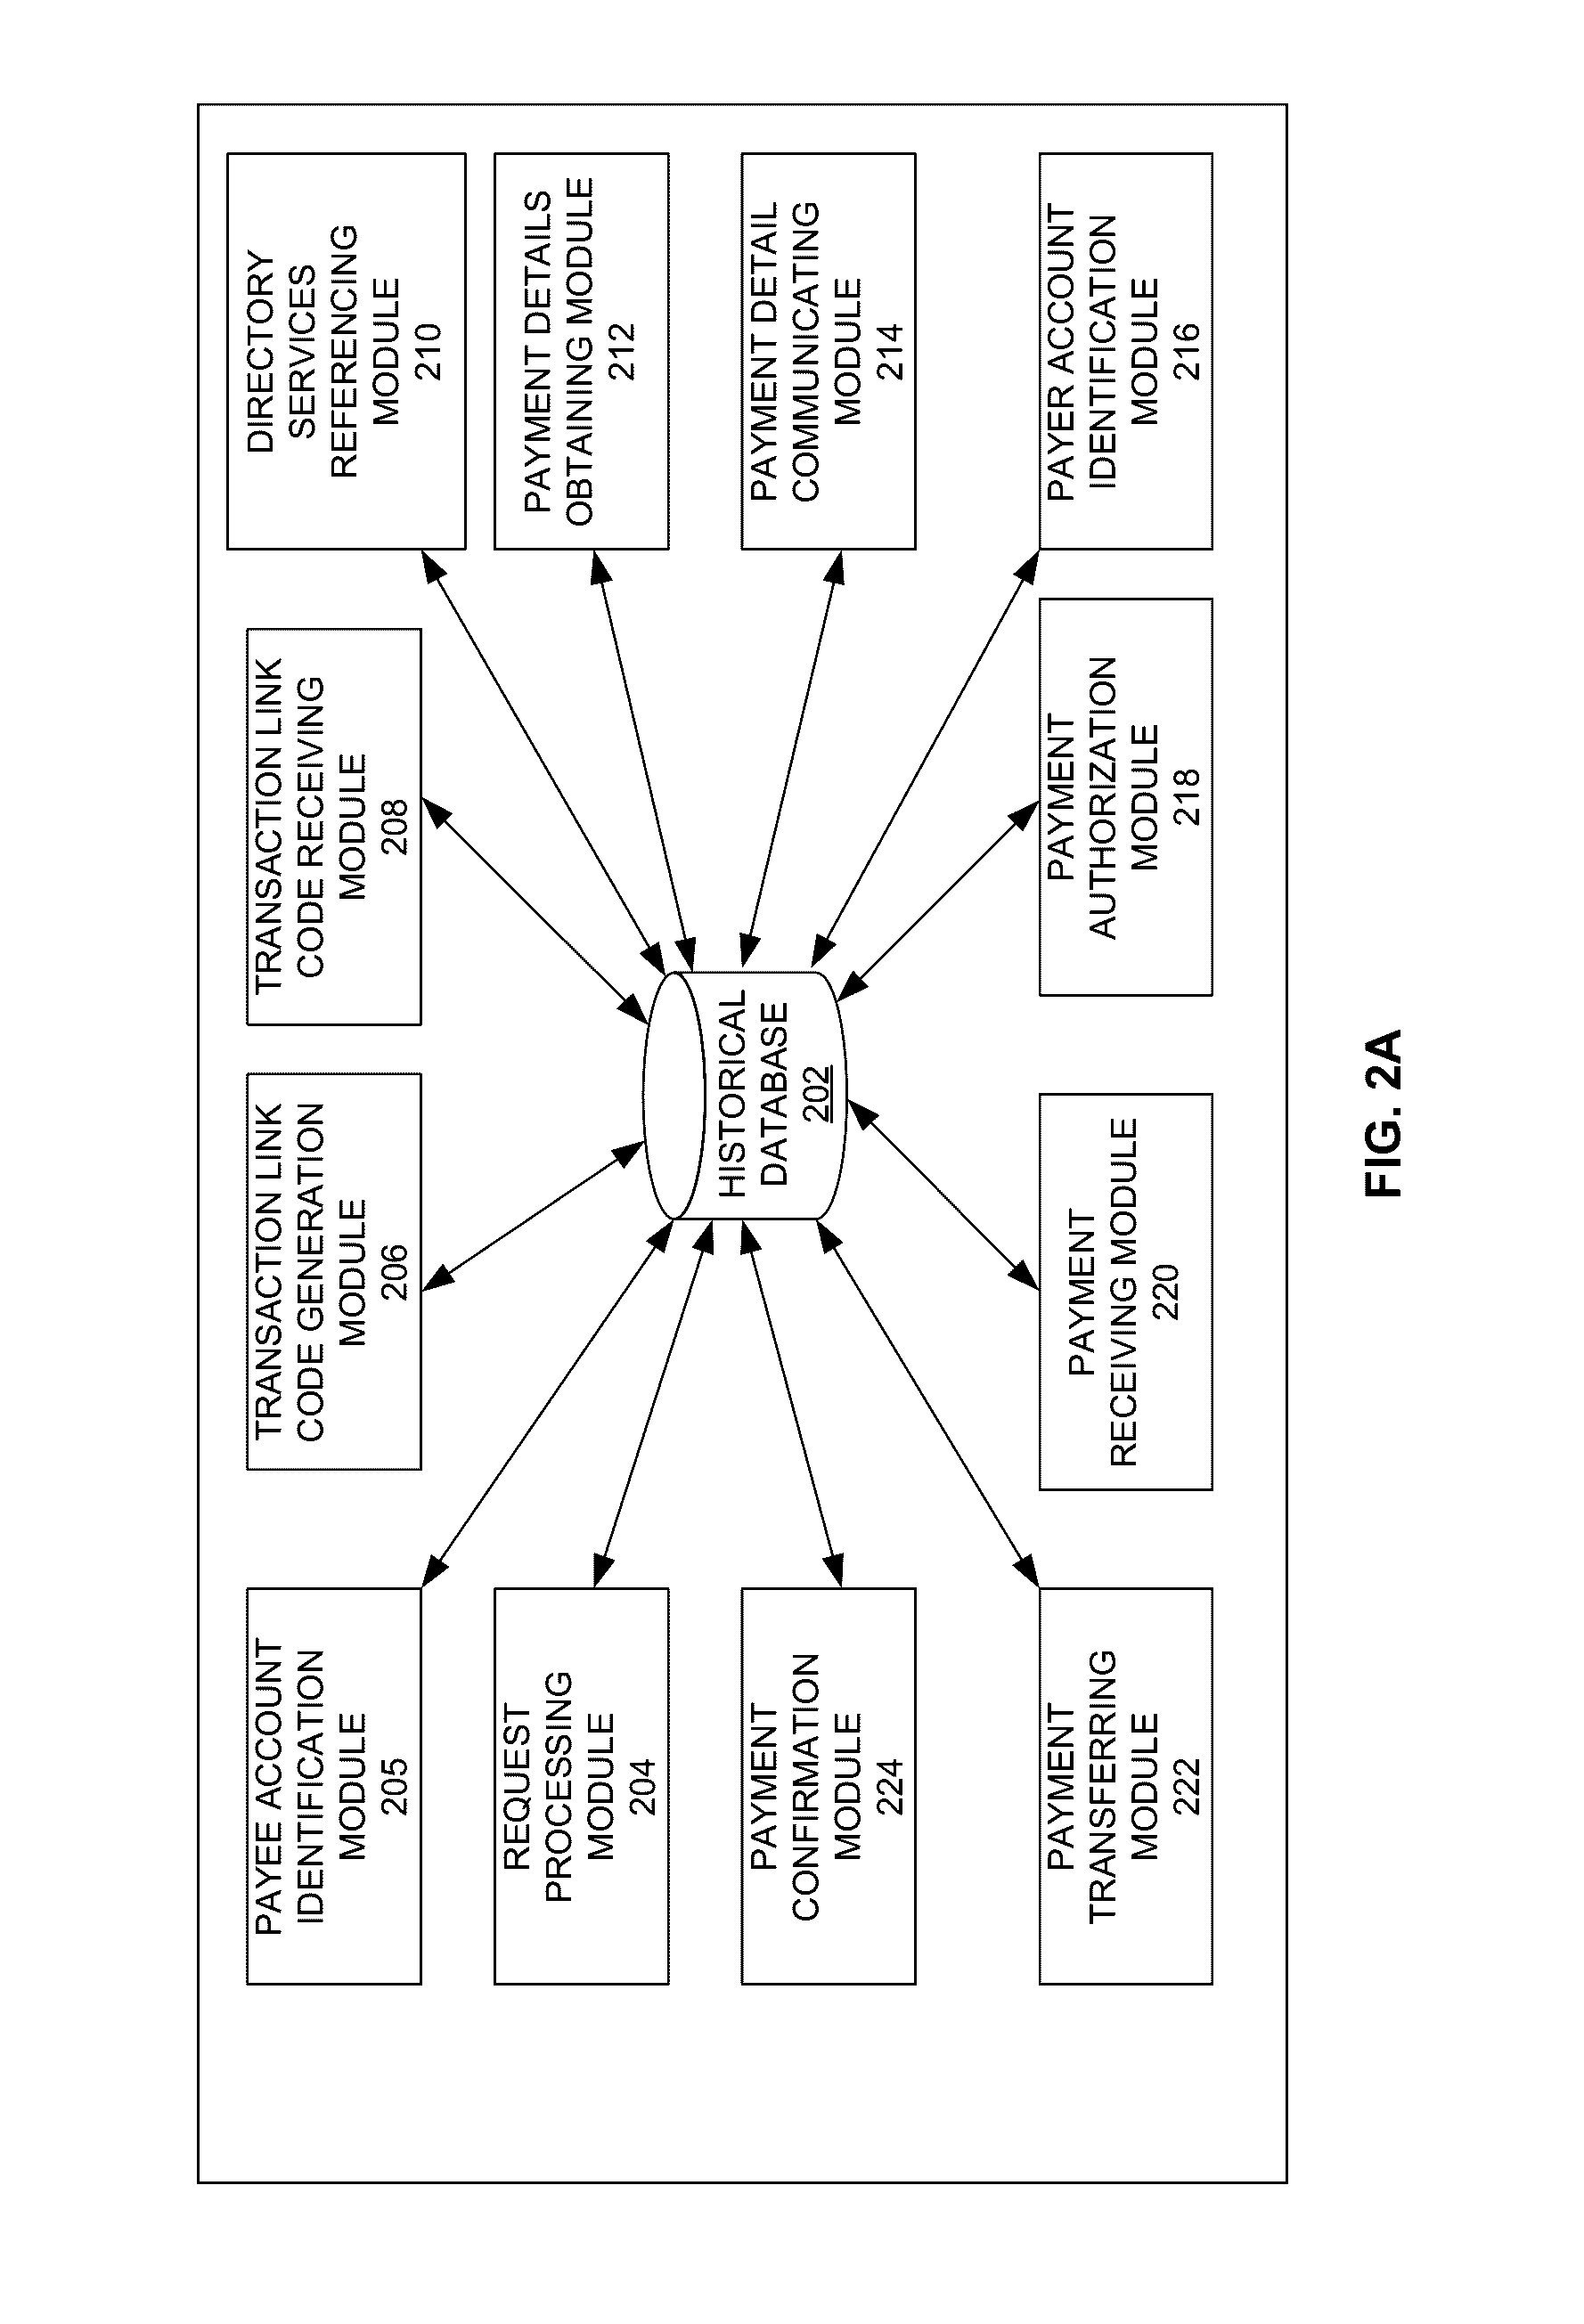 System and method for electronic payment using payment server provided transaction link codes